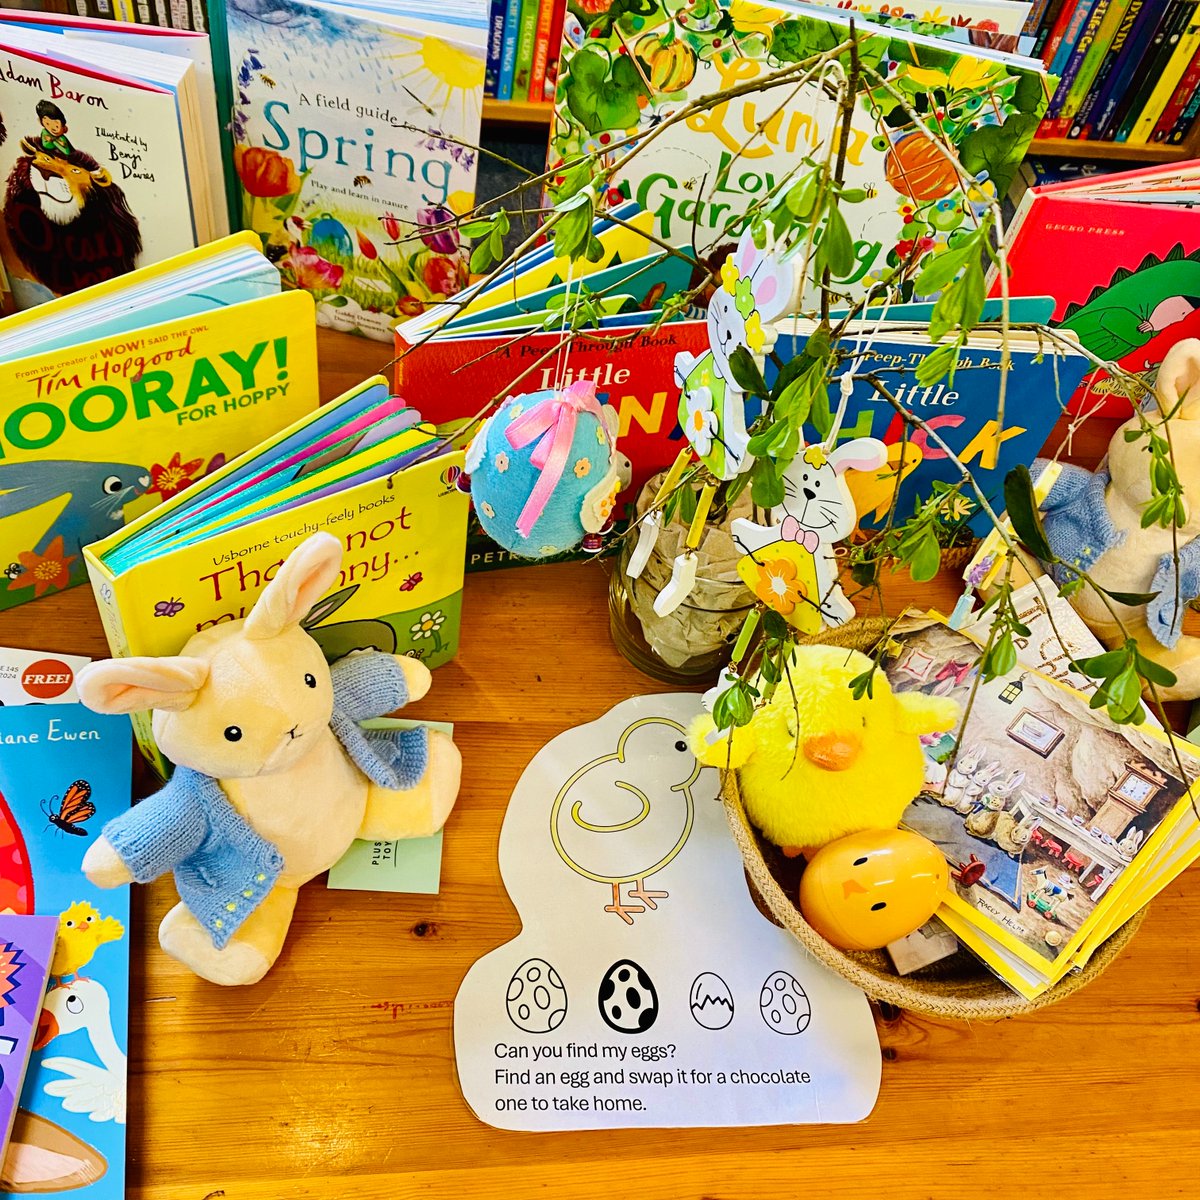 It's Easter in the bookshop and we have some lovely activities for the little ones over the school holidays, as well as lots of wonderful Easter and Spring books 🥚🐣🐑🌸 also see our opening hours for the Easter weekend 👀